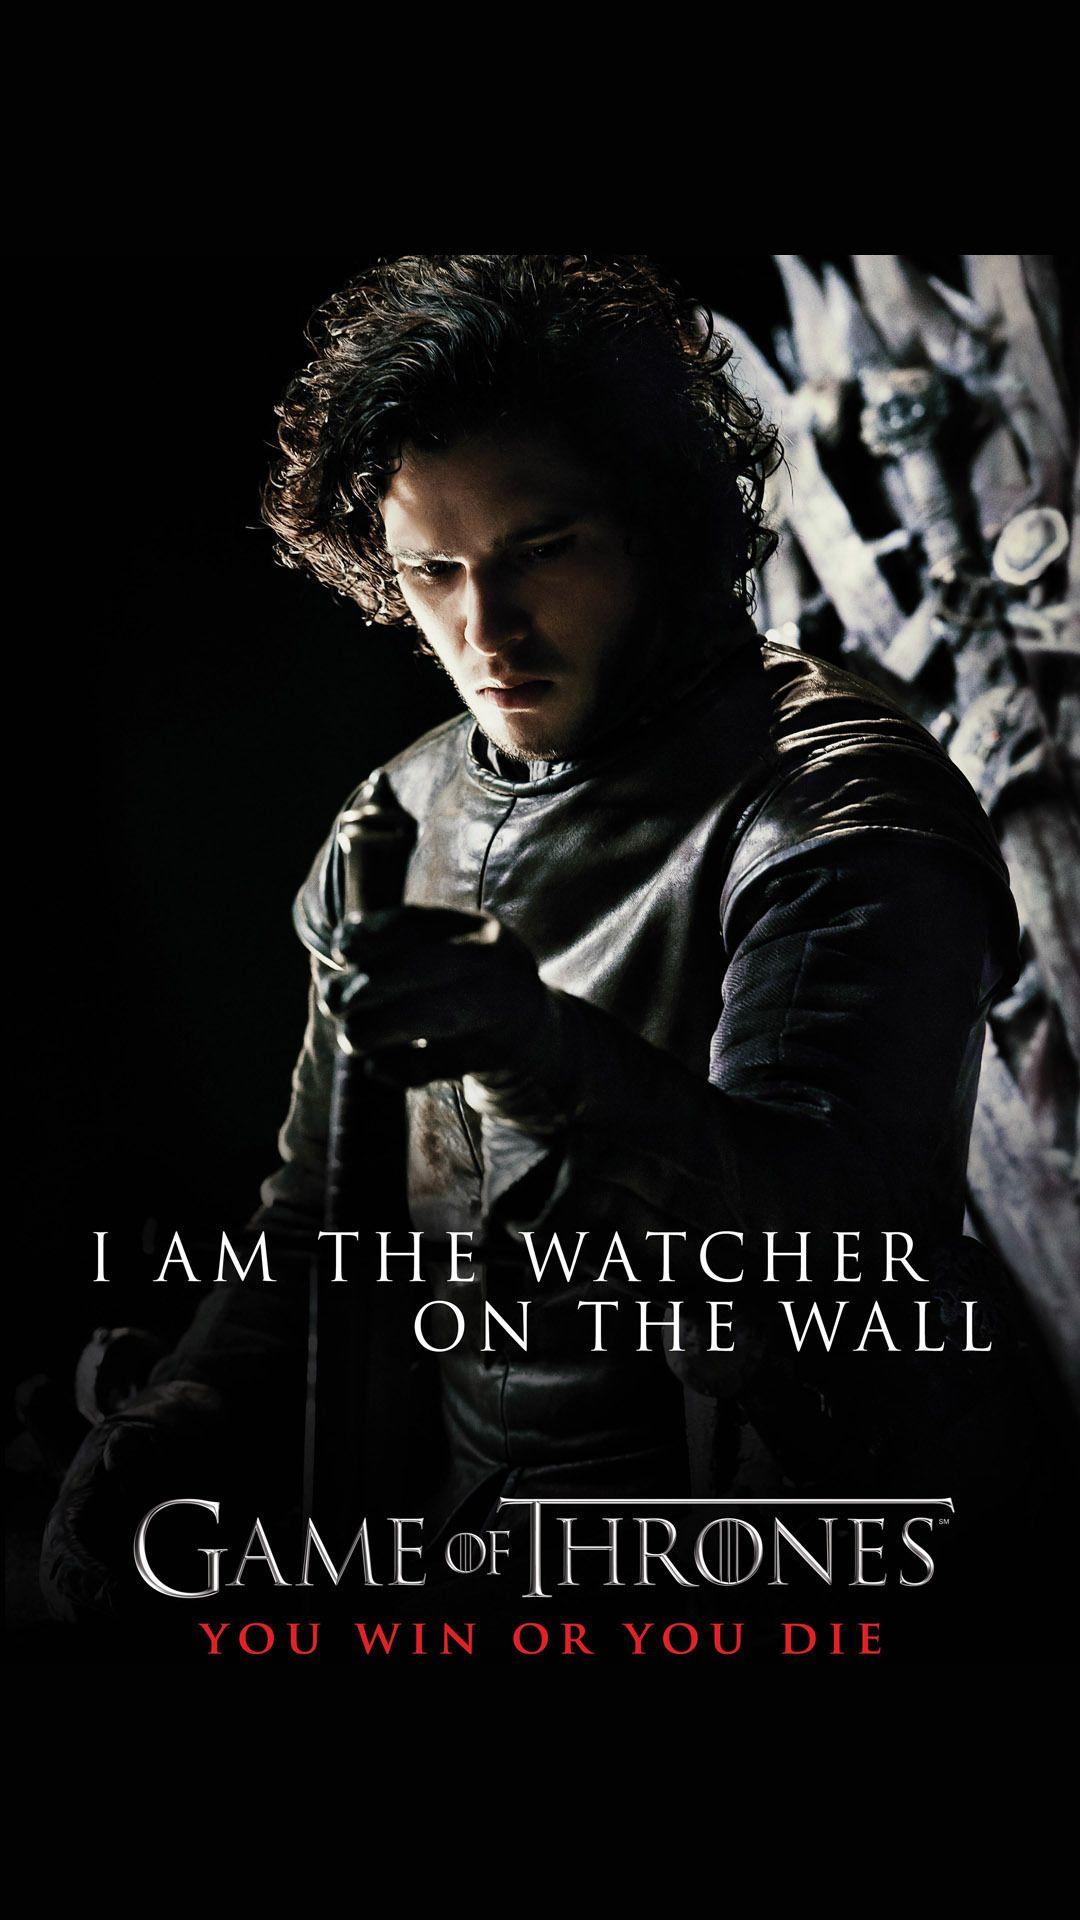 Best Game of Thrones HD wallpaper 1080x1920 for htc one